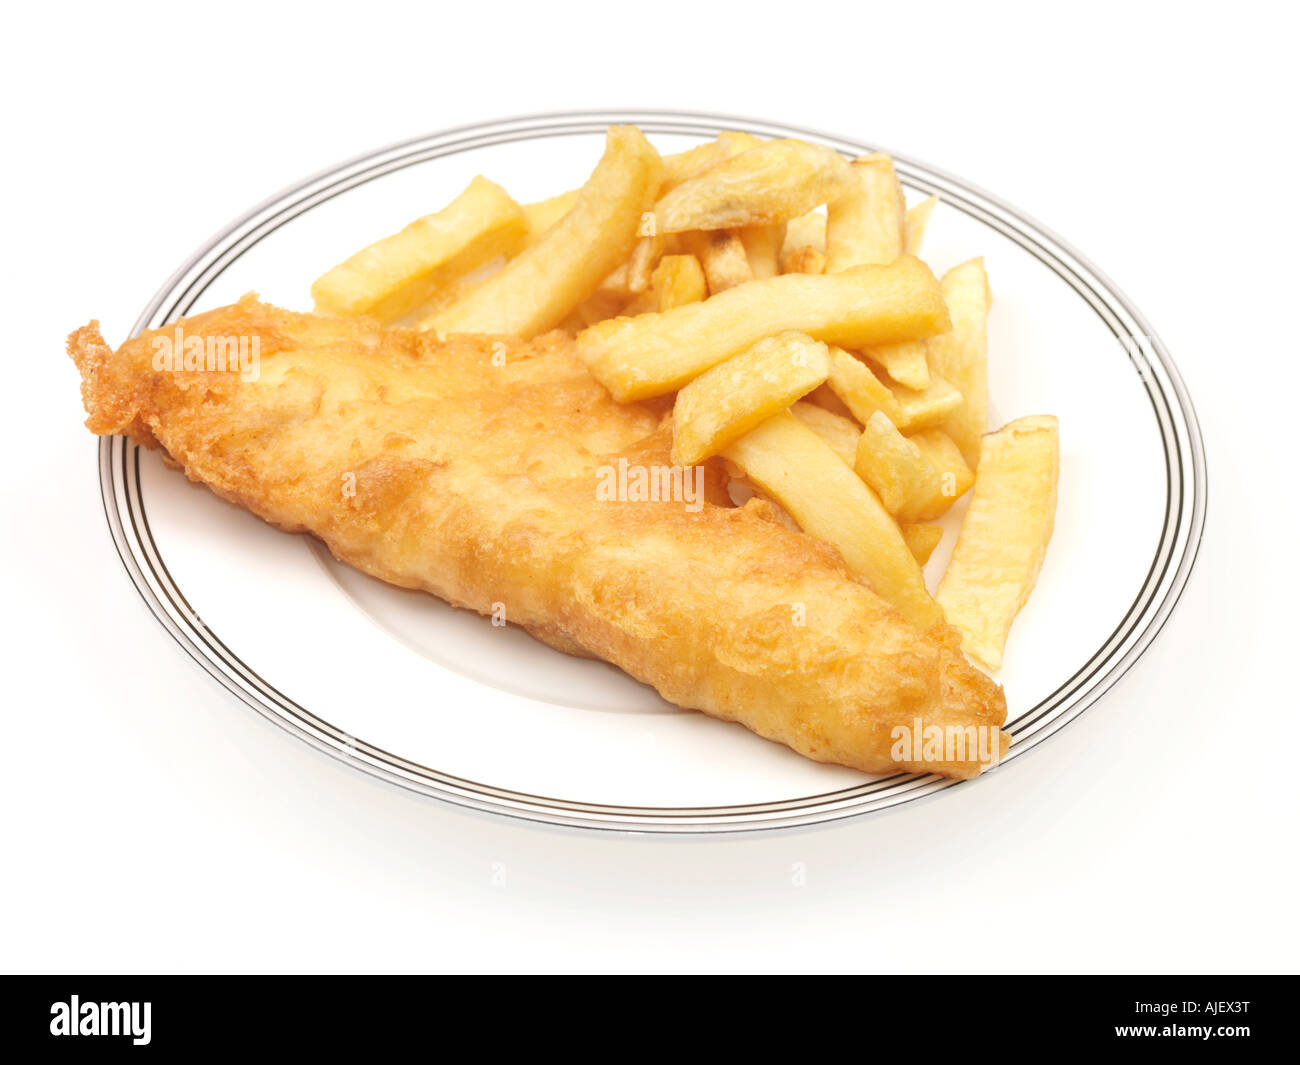 Plate Of Shop Bought Takeaway Cod or Haddock Fish and Chips Against A White Background with A Clipping Path And No People Stock Photo